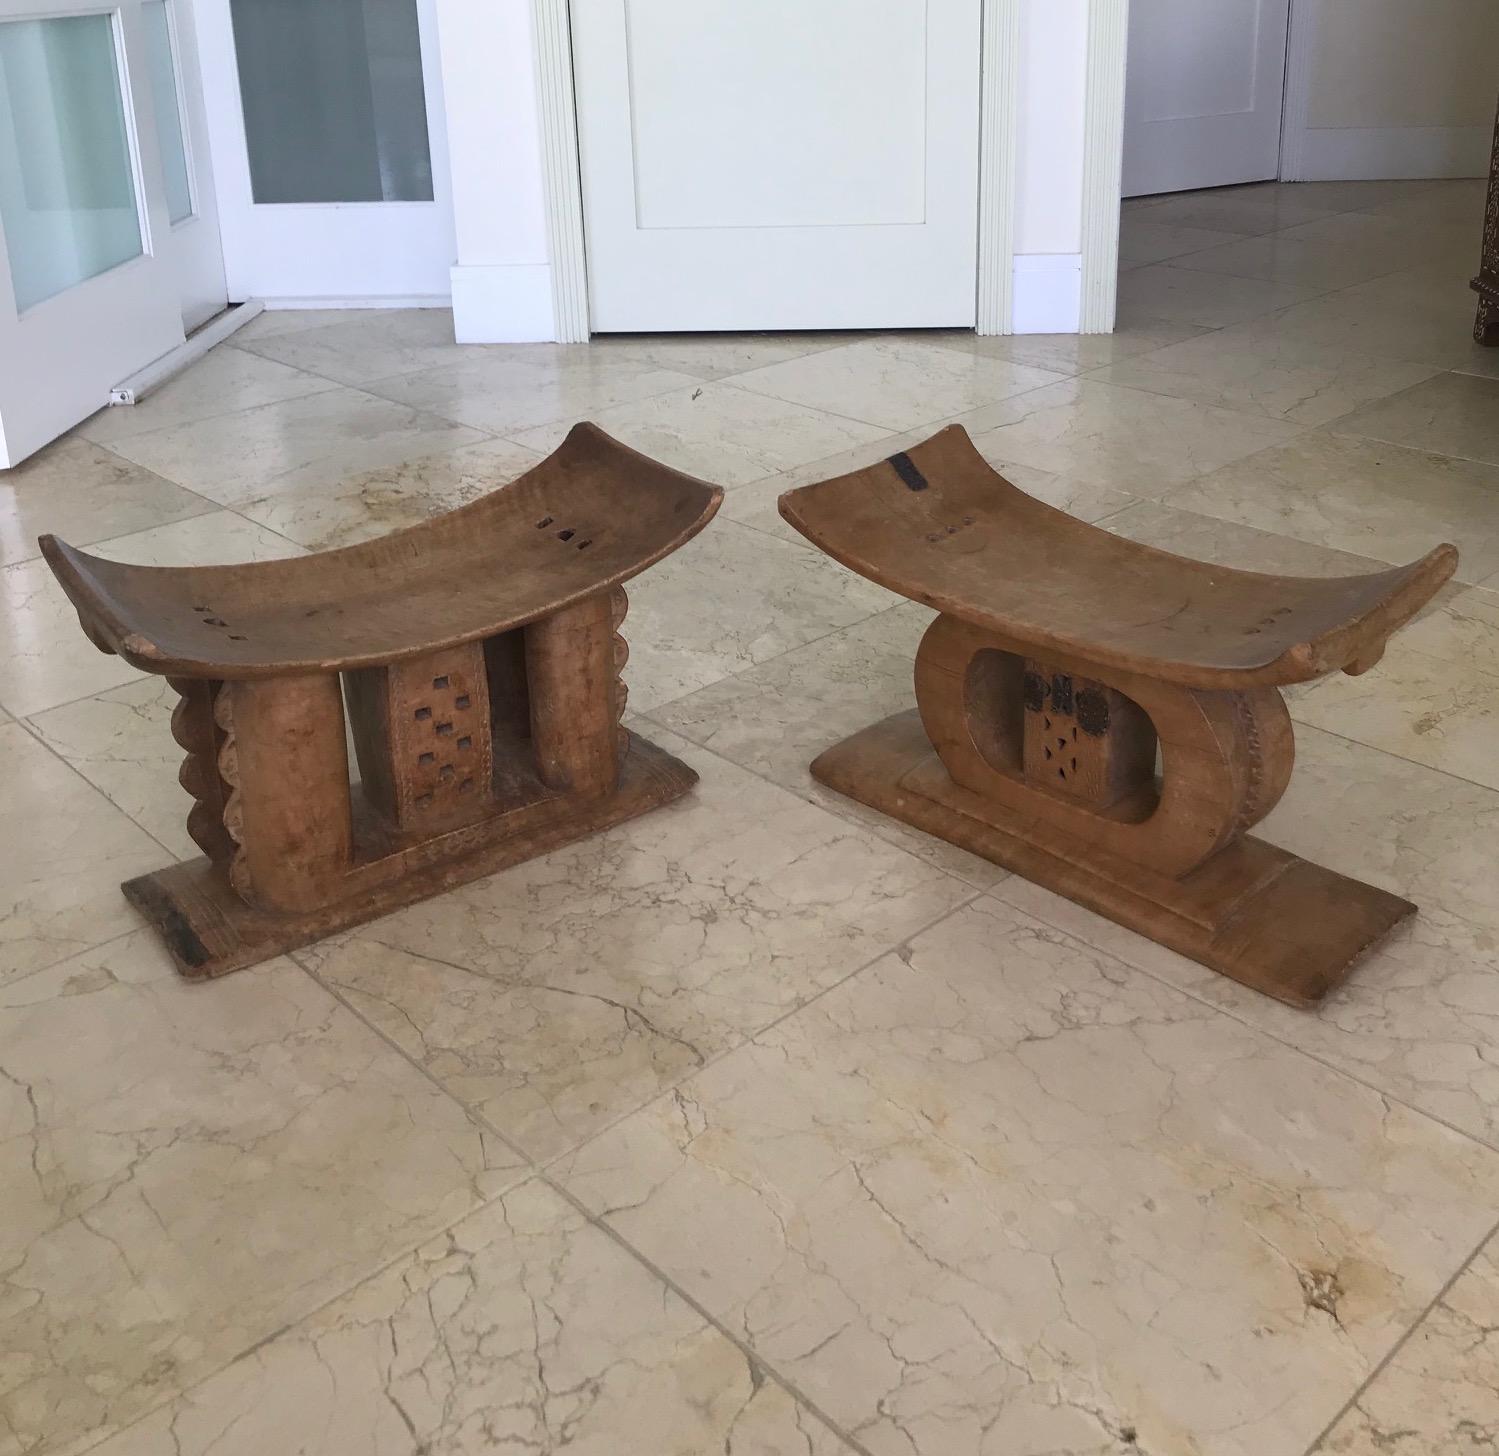 Genuine traditional African Ashanti stools signifying power and status, and symbols of leadership. Carved from a single block of wood featuring curved seat and intricate support base. The stools feature a series of incised tribal carvings, hand